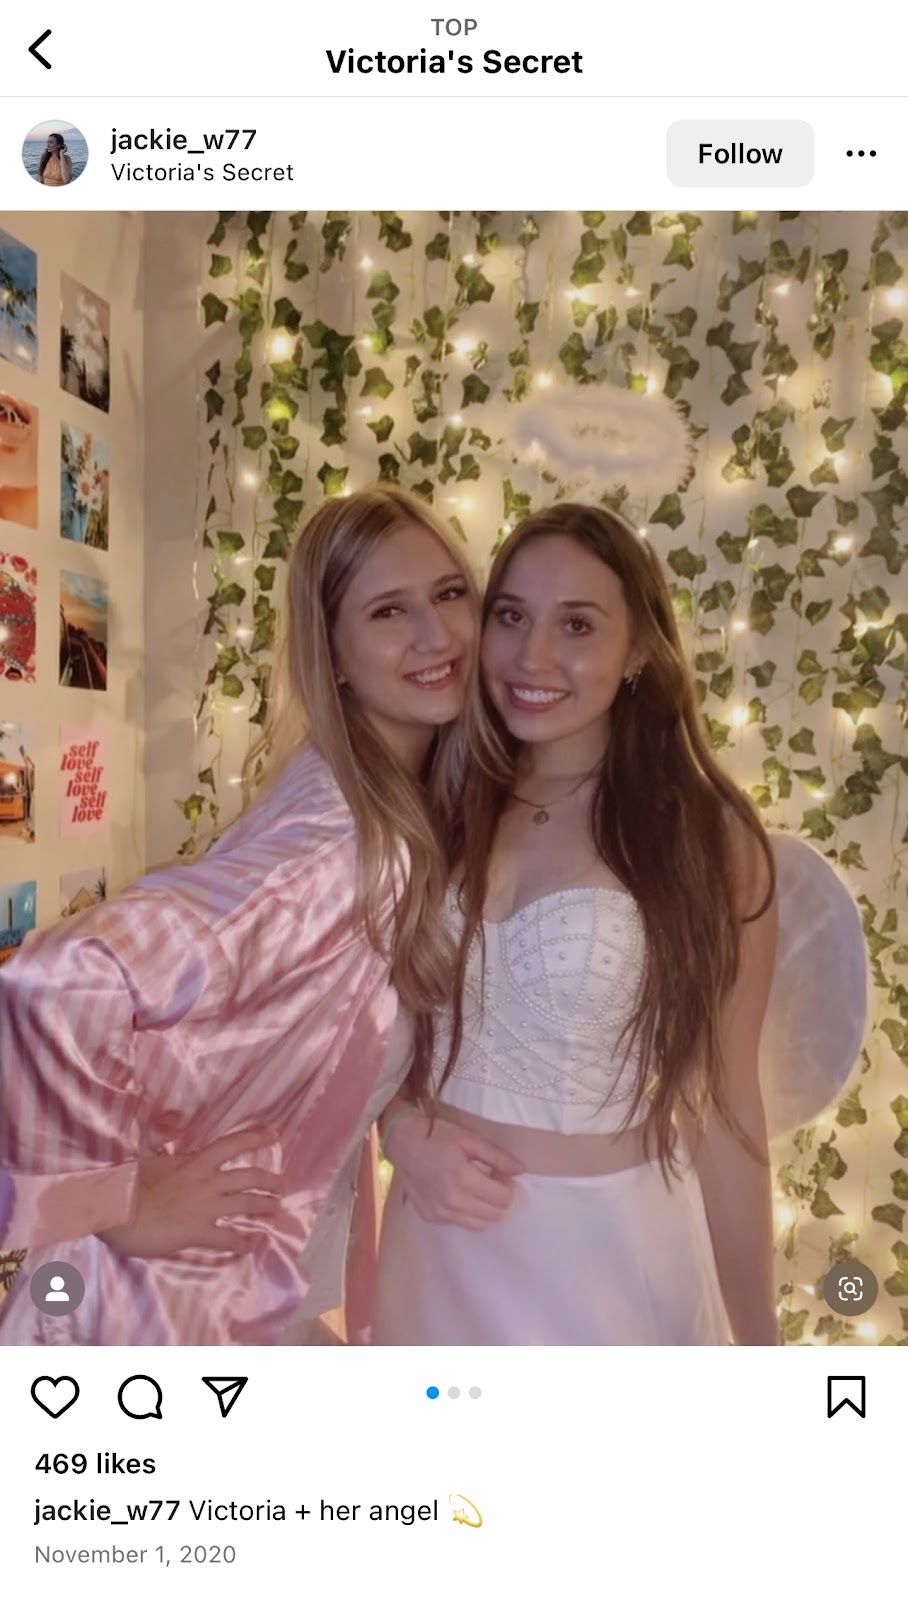 Victoria's Secret instagram location with two college girls